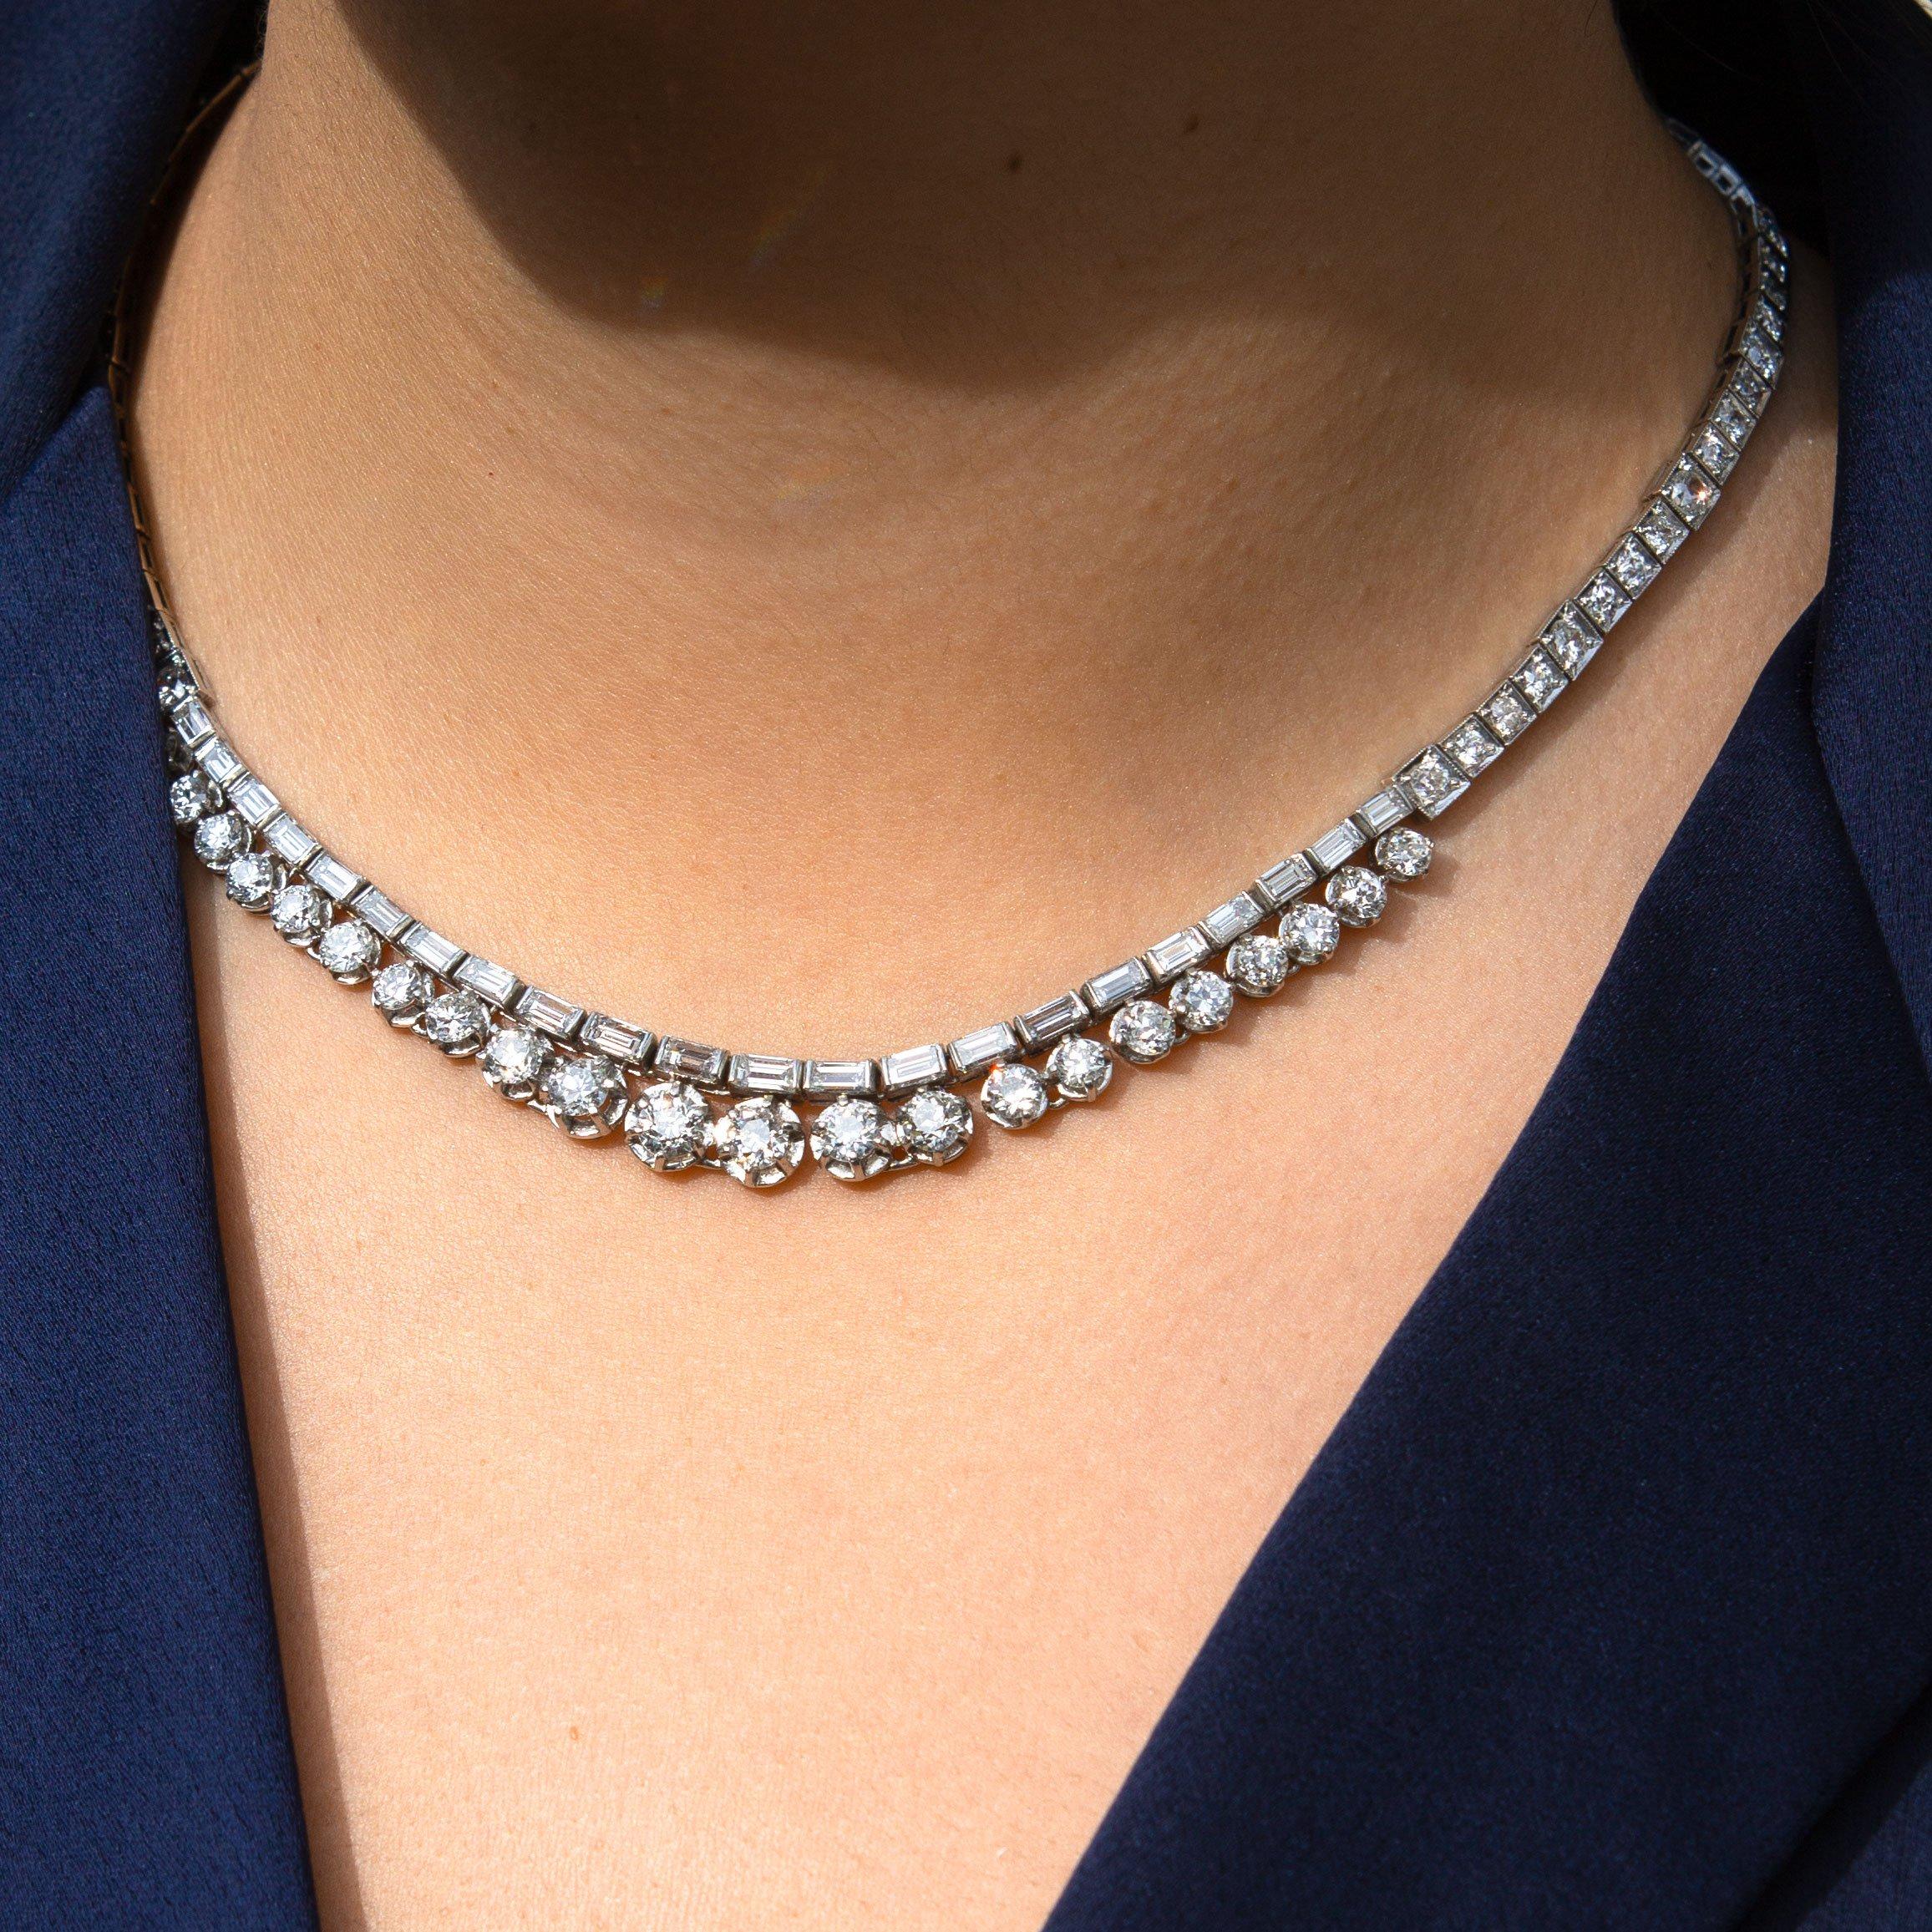 This is a jewelry piece that needs no introduction. The magnificent Art Deco era diamond necklace packs a hefty amount of sparkle, almost 17 carats worth to be exact. A string of old European cut diamonds and straight baguettes practically float